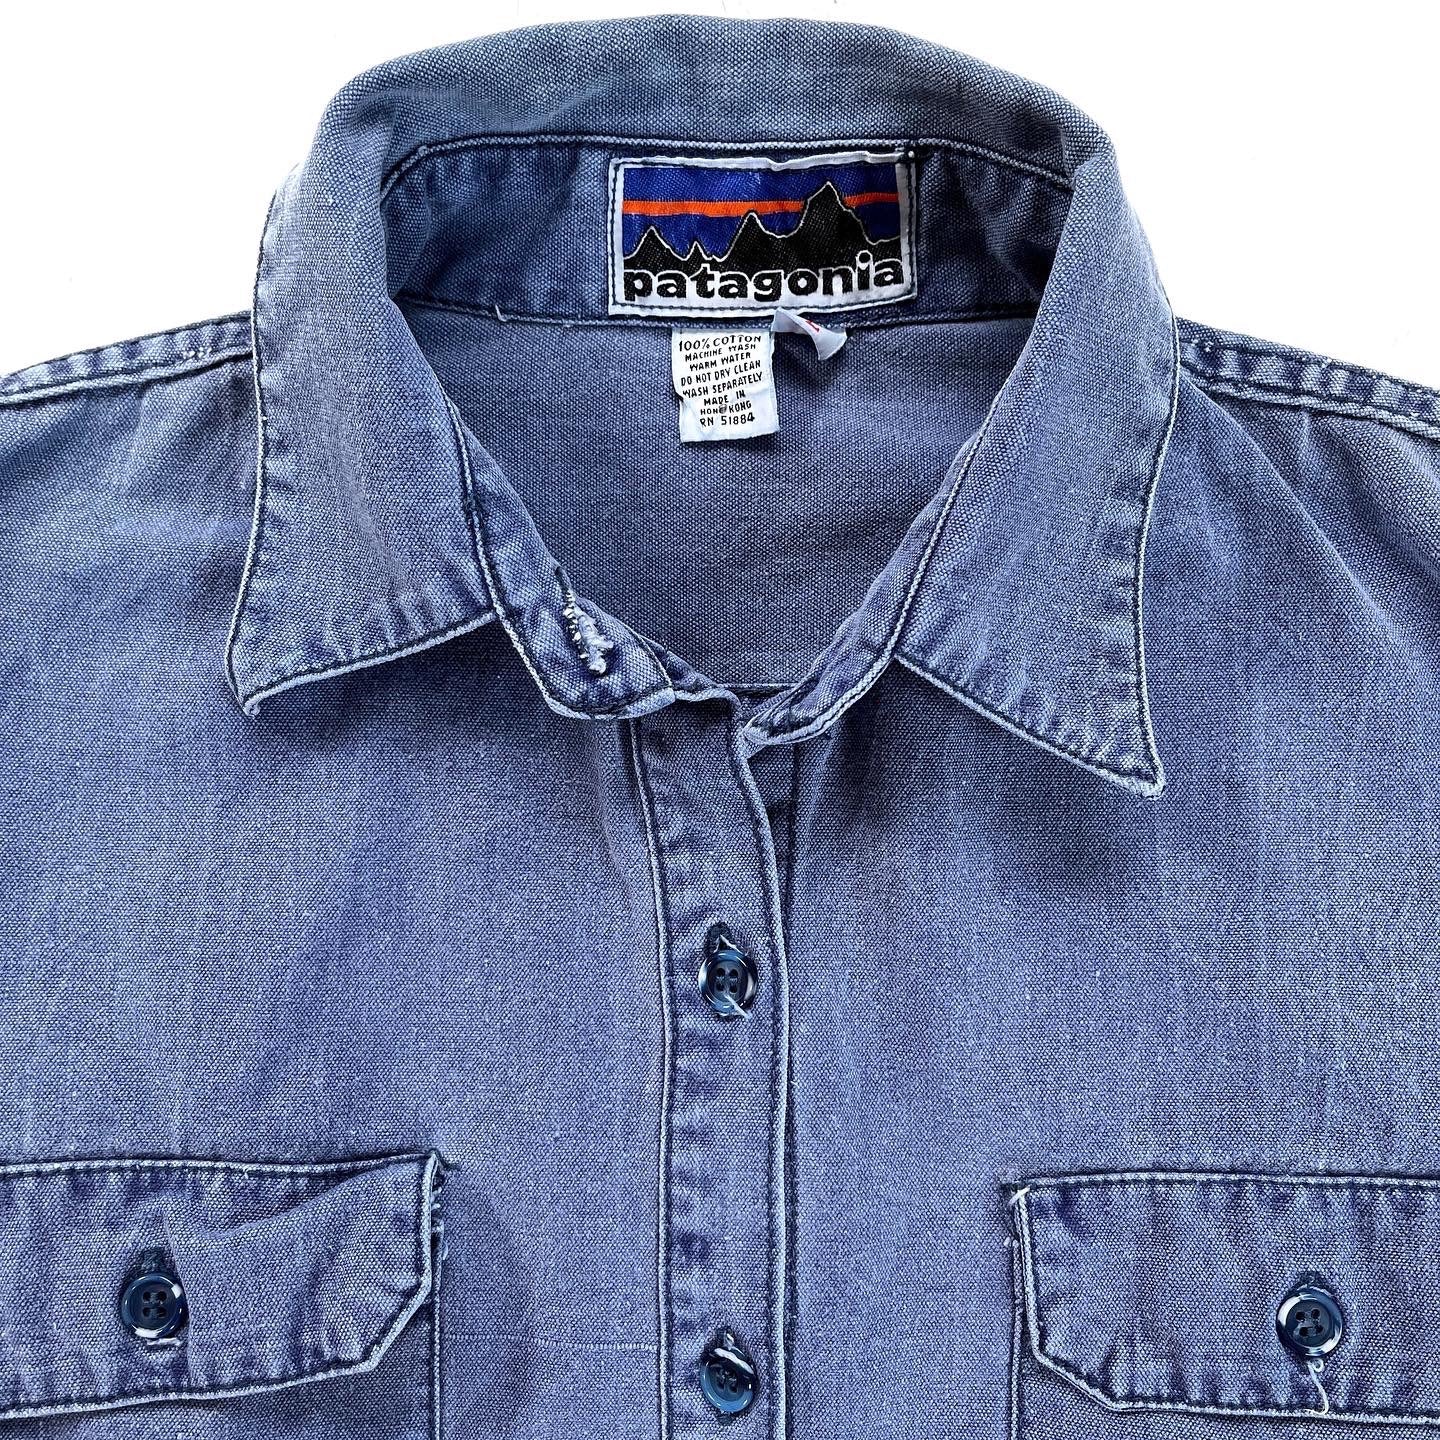 1970s Patagonia “Big Label” Cotton Canvas Shirt, Faded Blue (S)